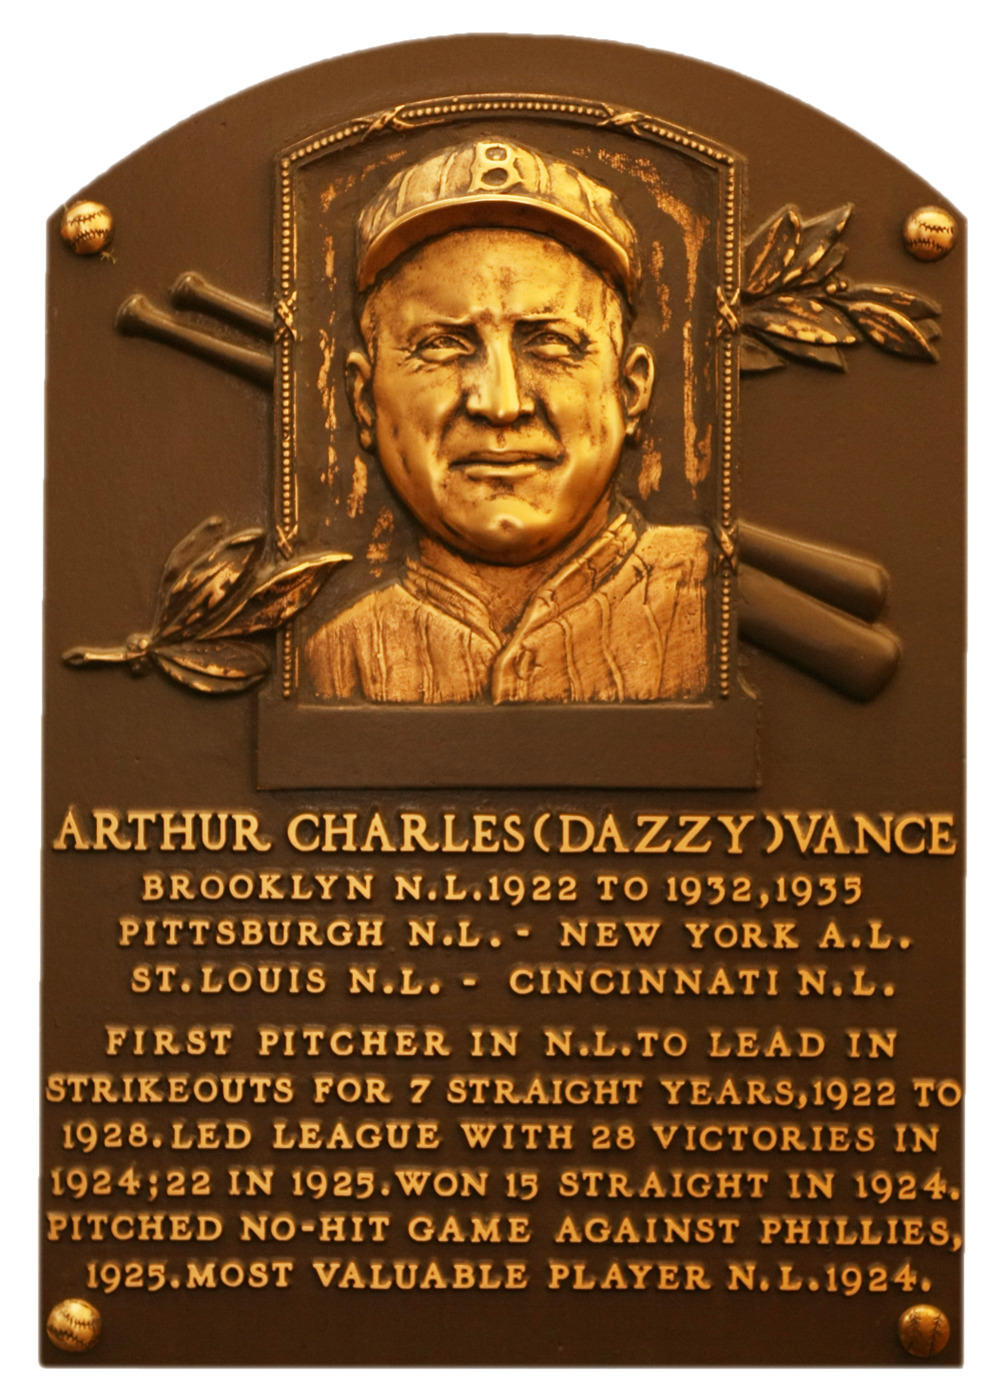 Dazzy Vance Hall of Fame plaque